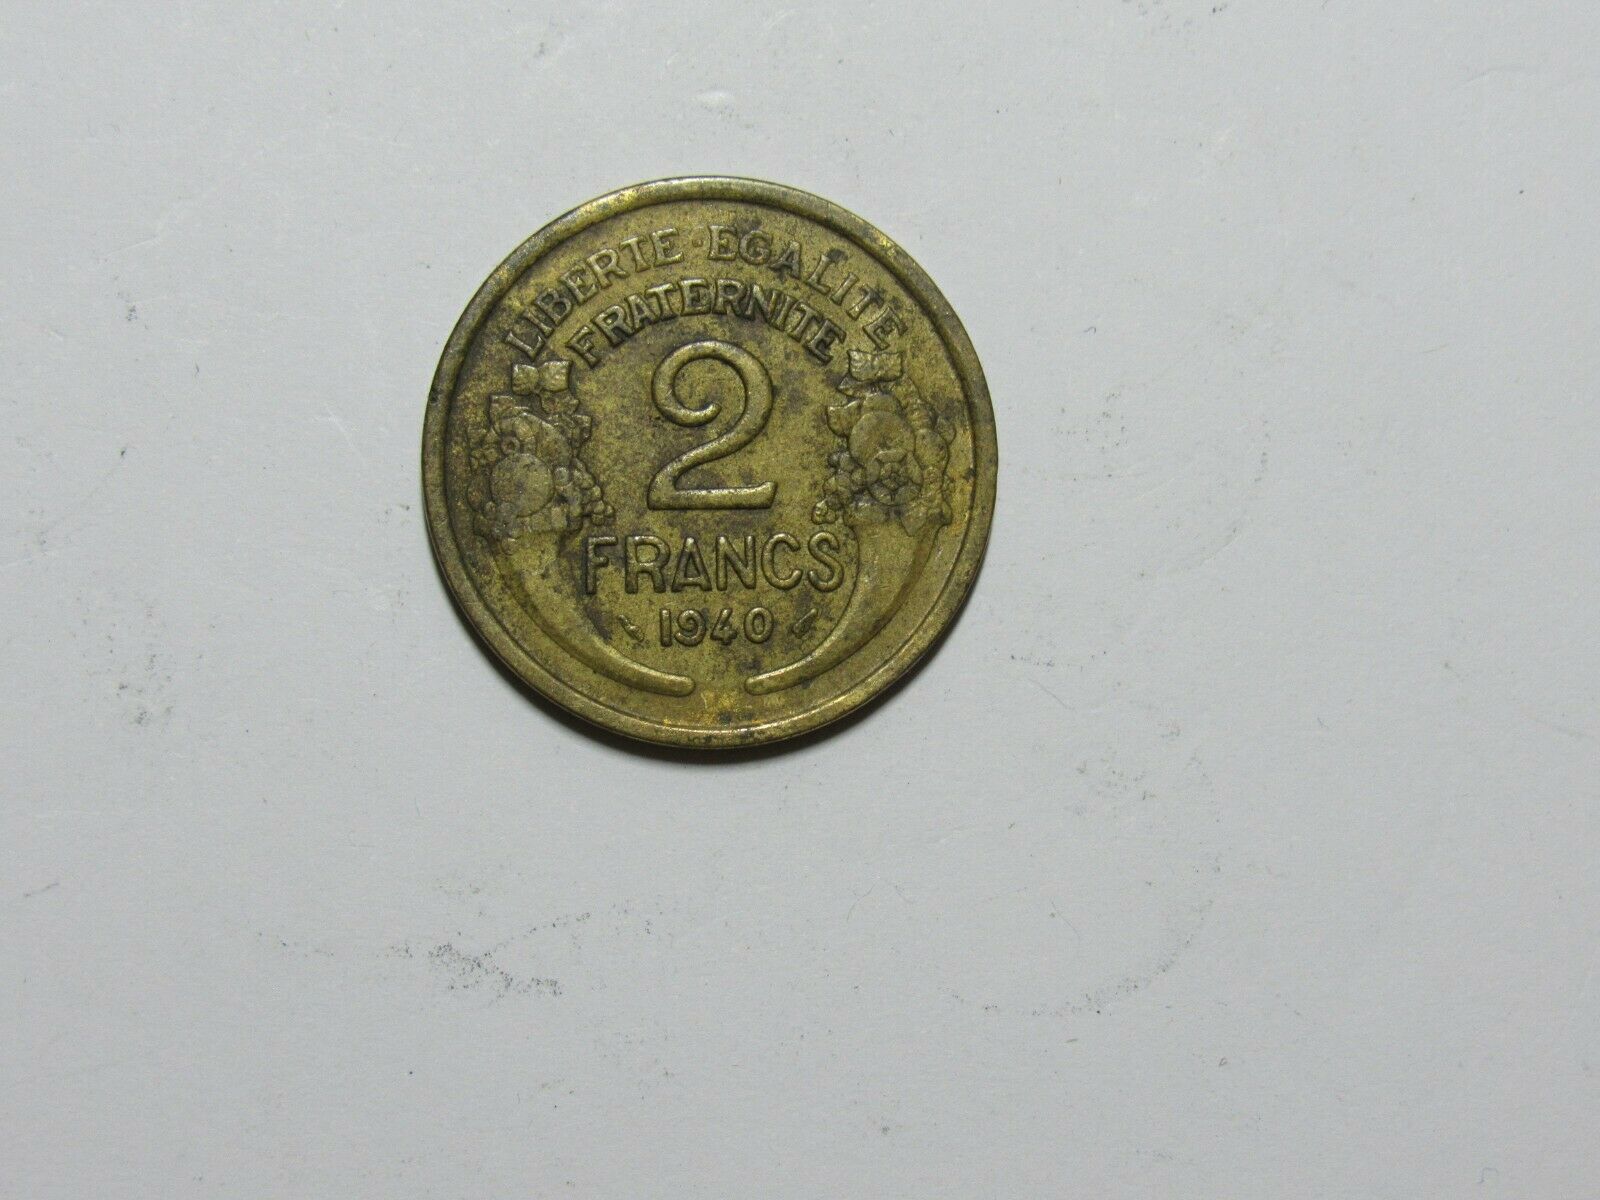 Old France Coin - 1940 2 Francs - Circulated